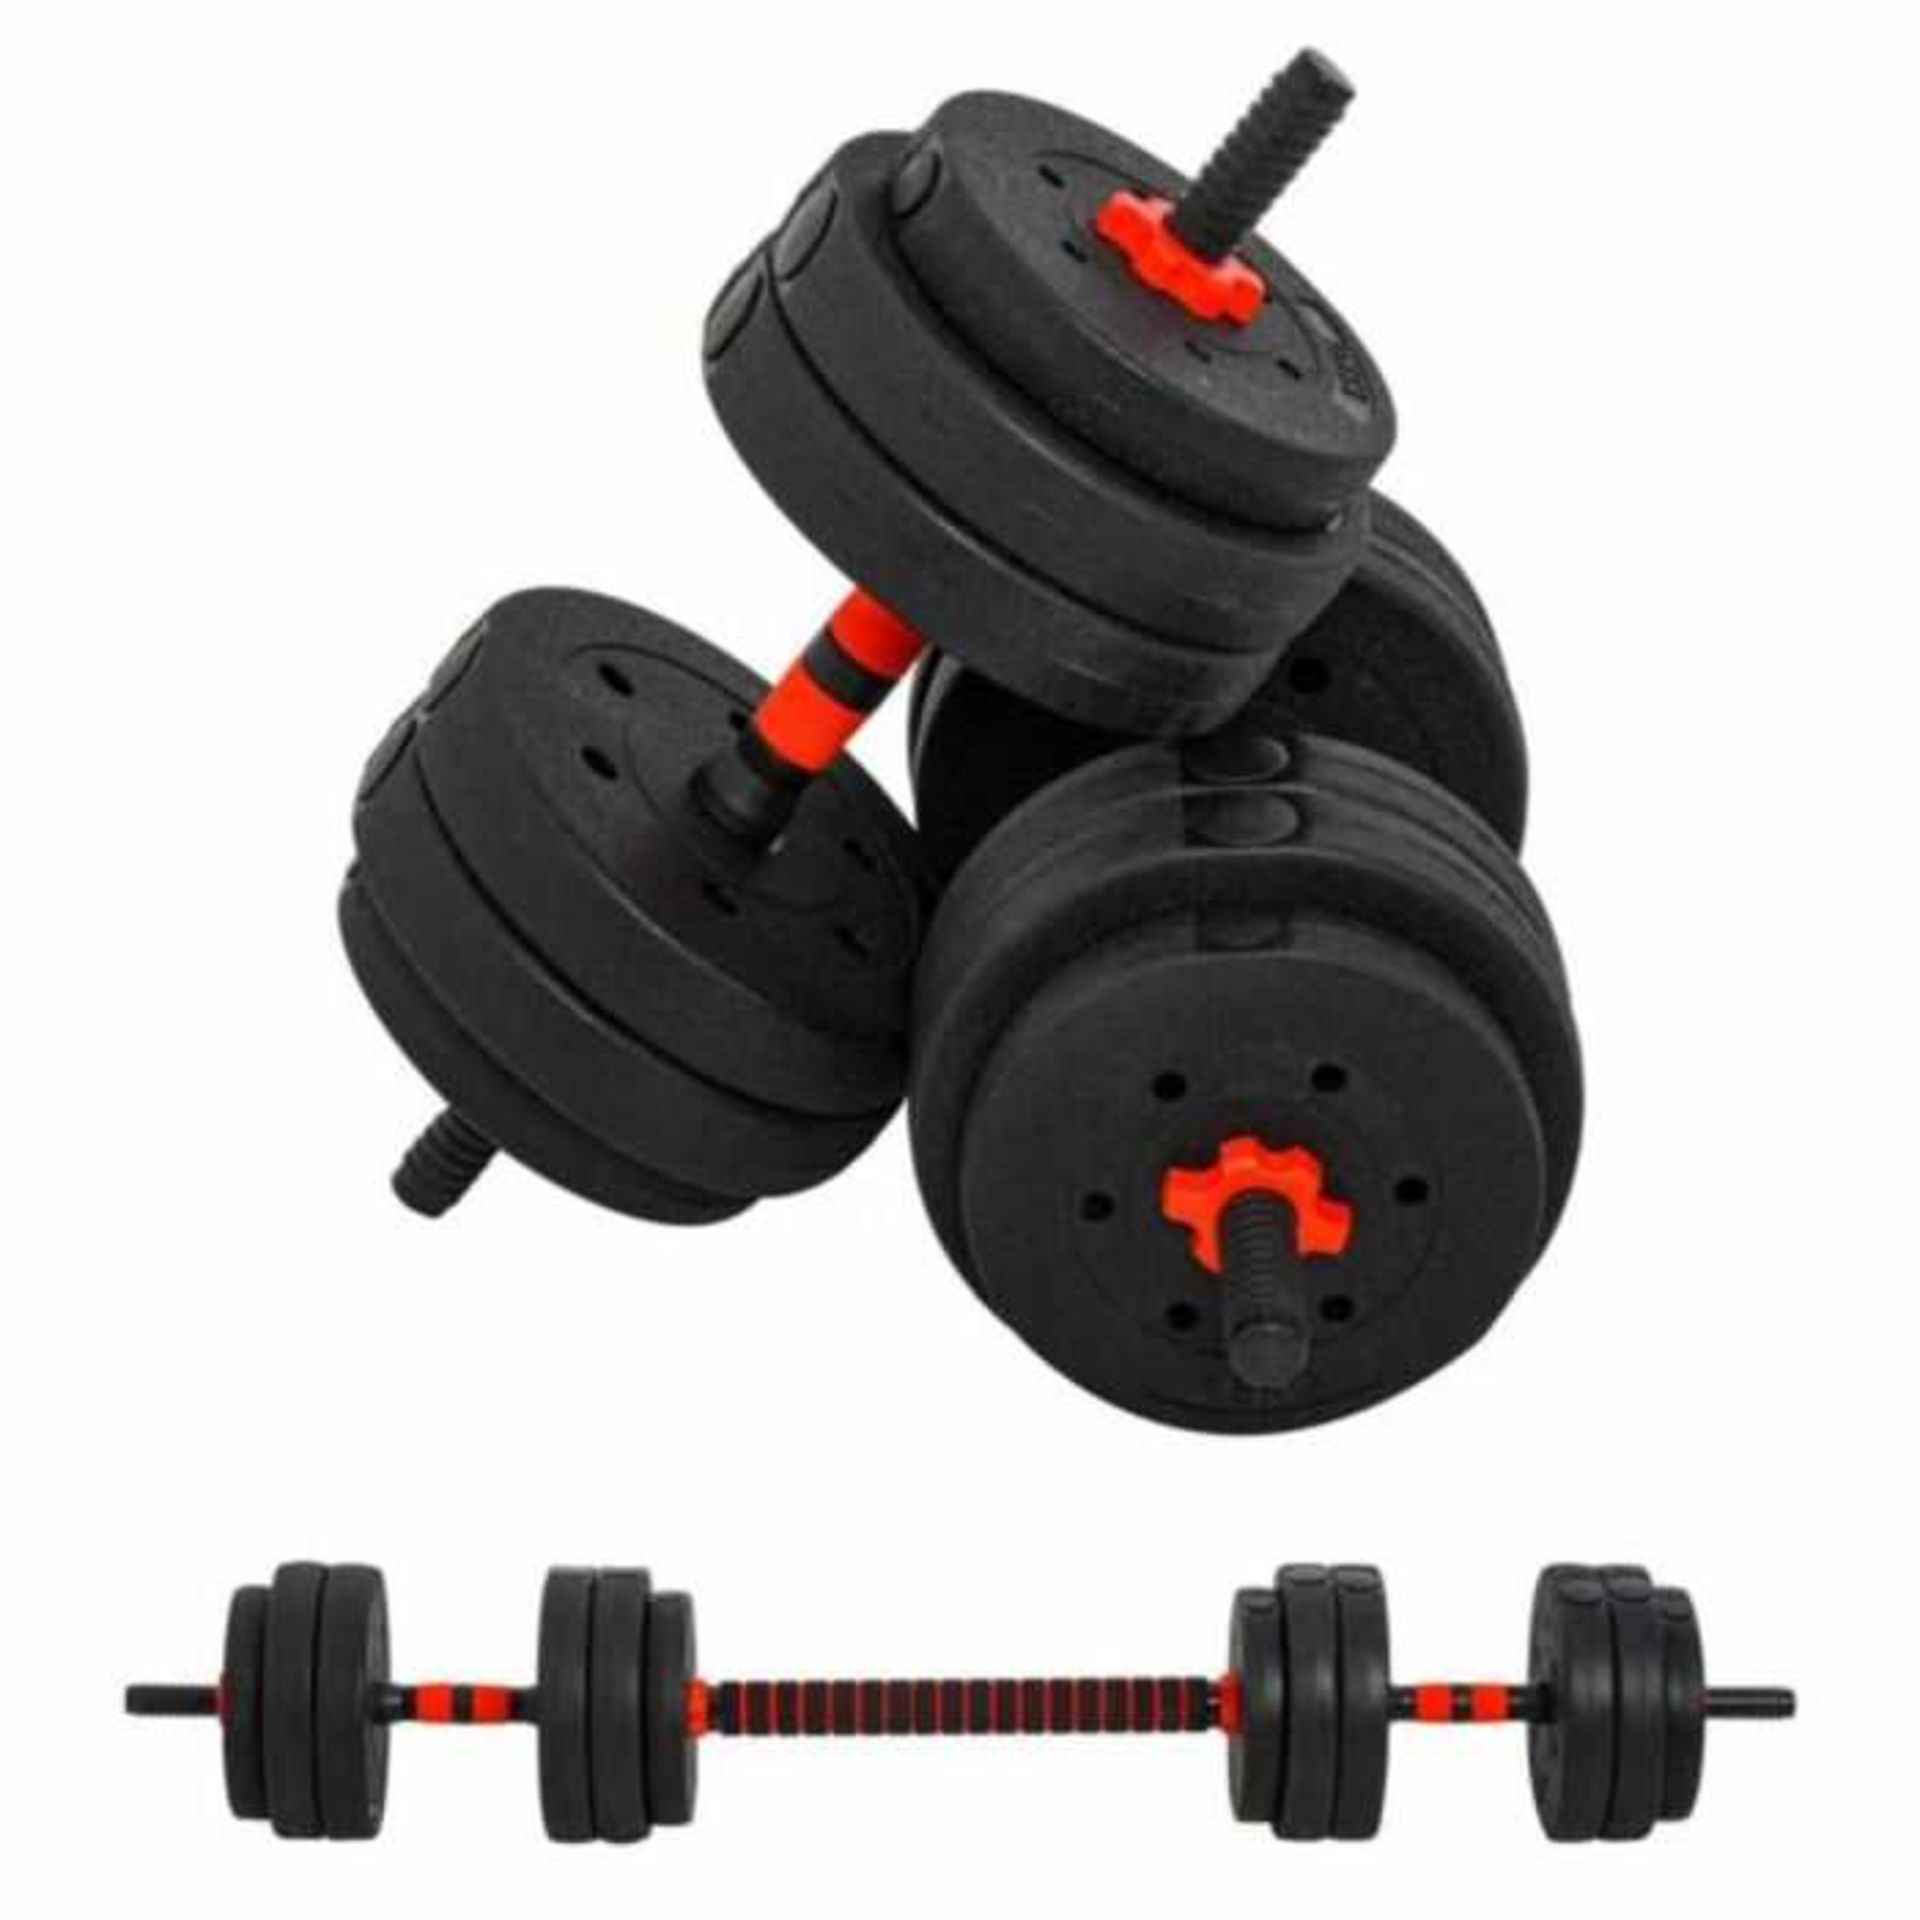 VAT 1x Movtotop 30KG adjustable Dumb Bell weight set, new and boxed, we can only find these in - Image 2 of 4